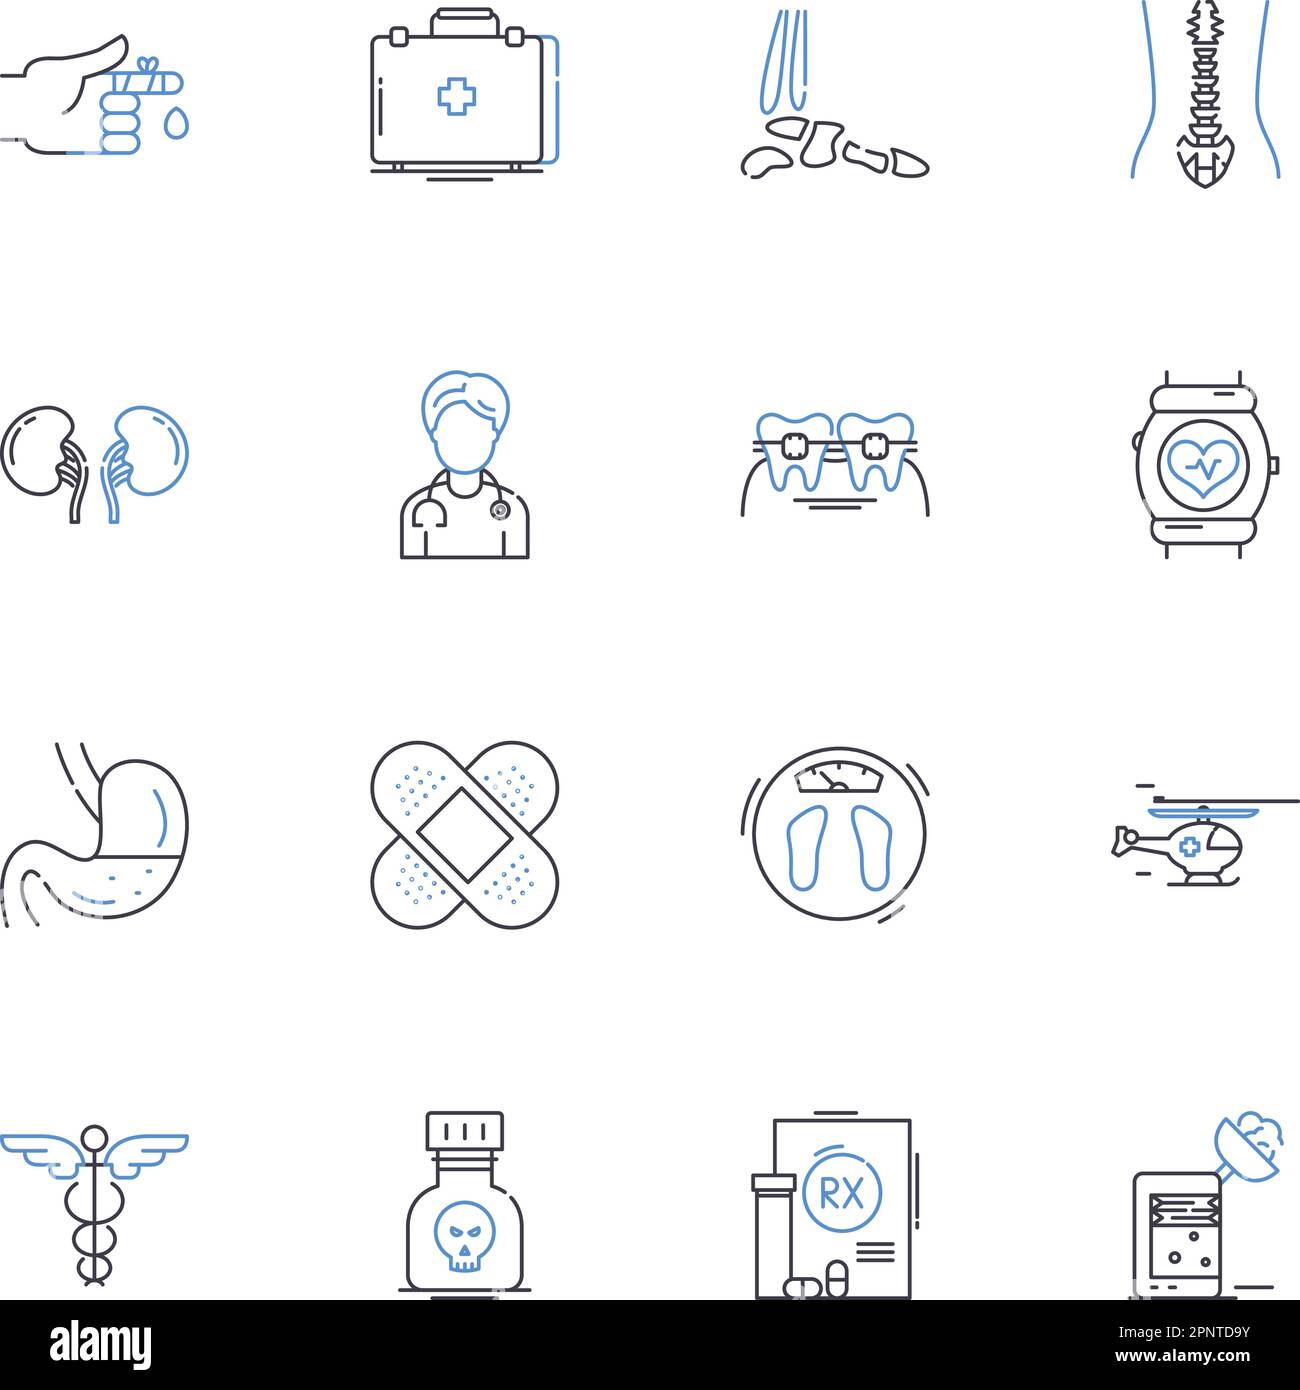 Prostate exam line icons collection. Screening, Diagnosis, Checkup, Digital, Rectal, Health, Cancer vector and linear illustration. Screening test Stock Vector